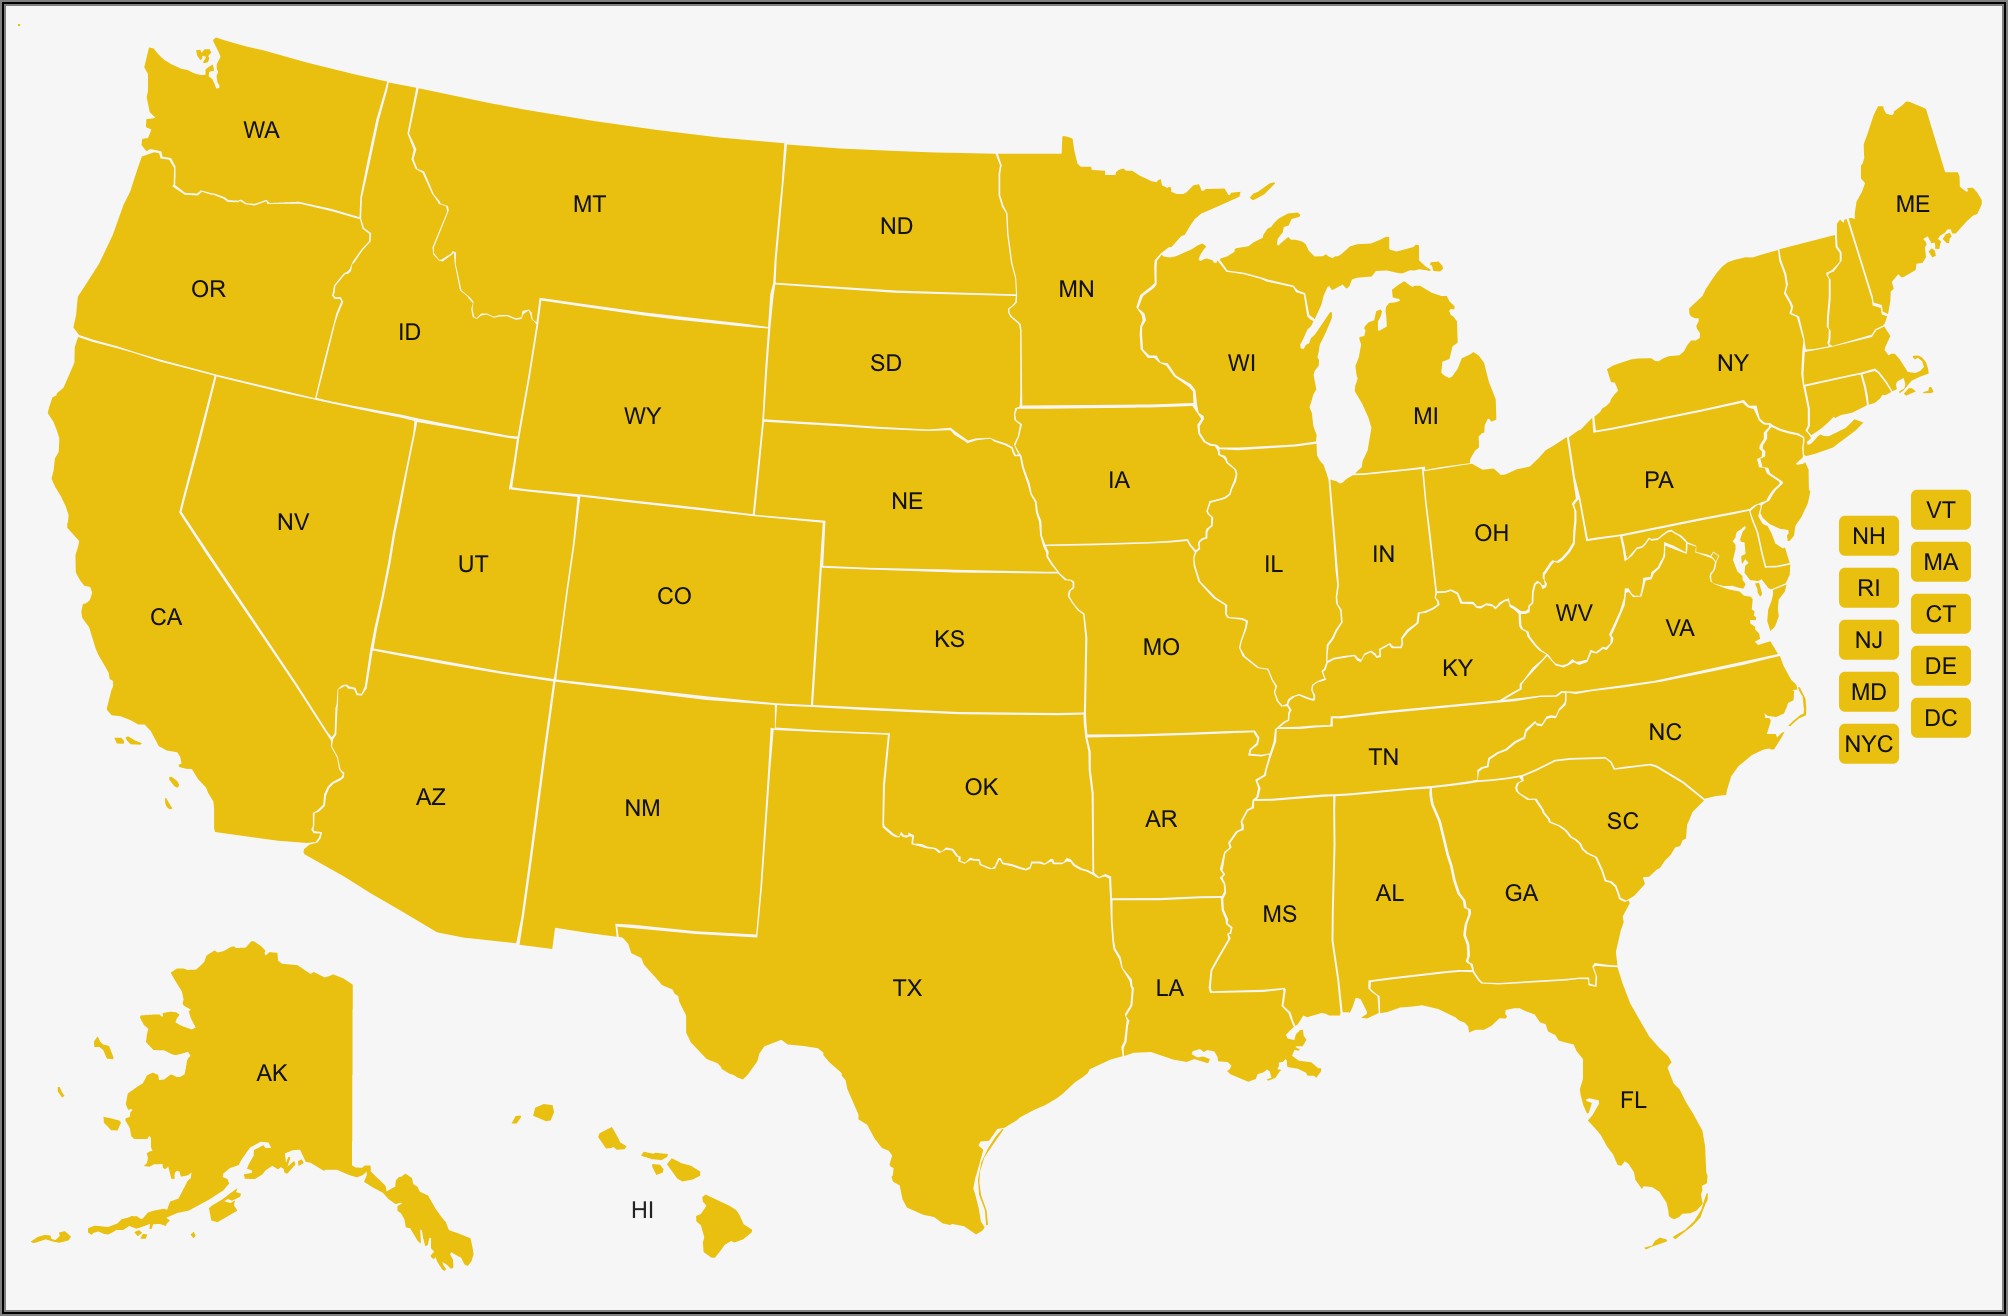 North Carolina Concealed Carry Permit Reciprocity Map